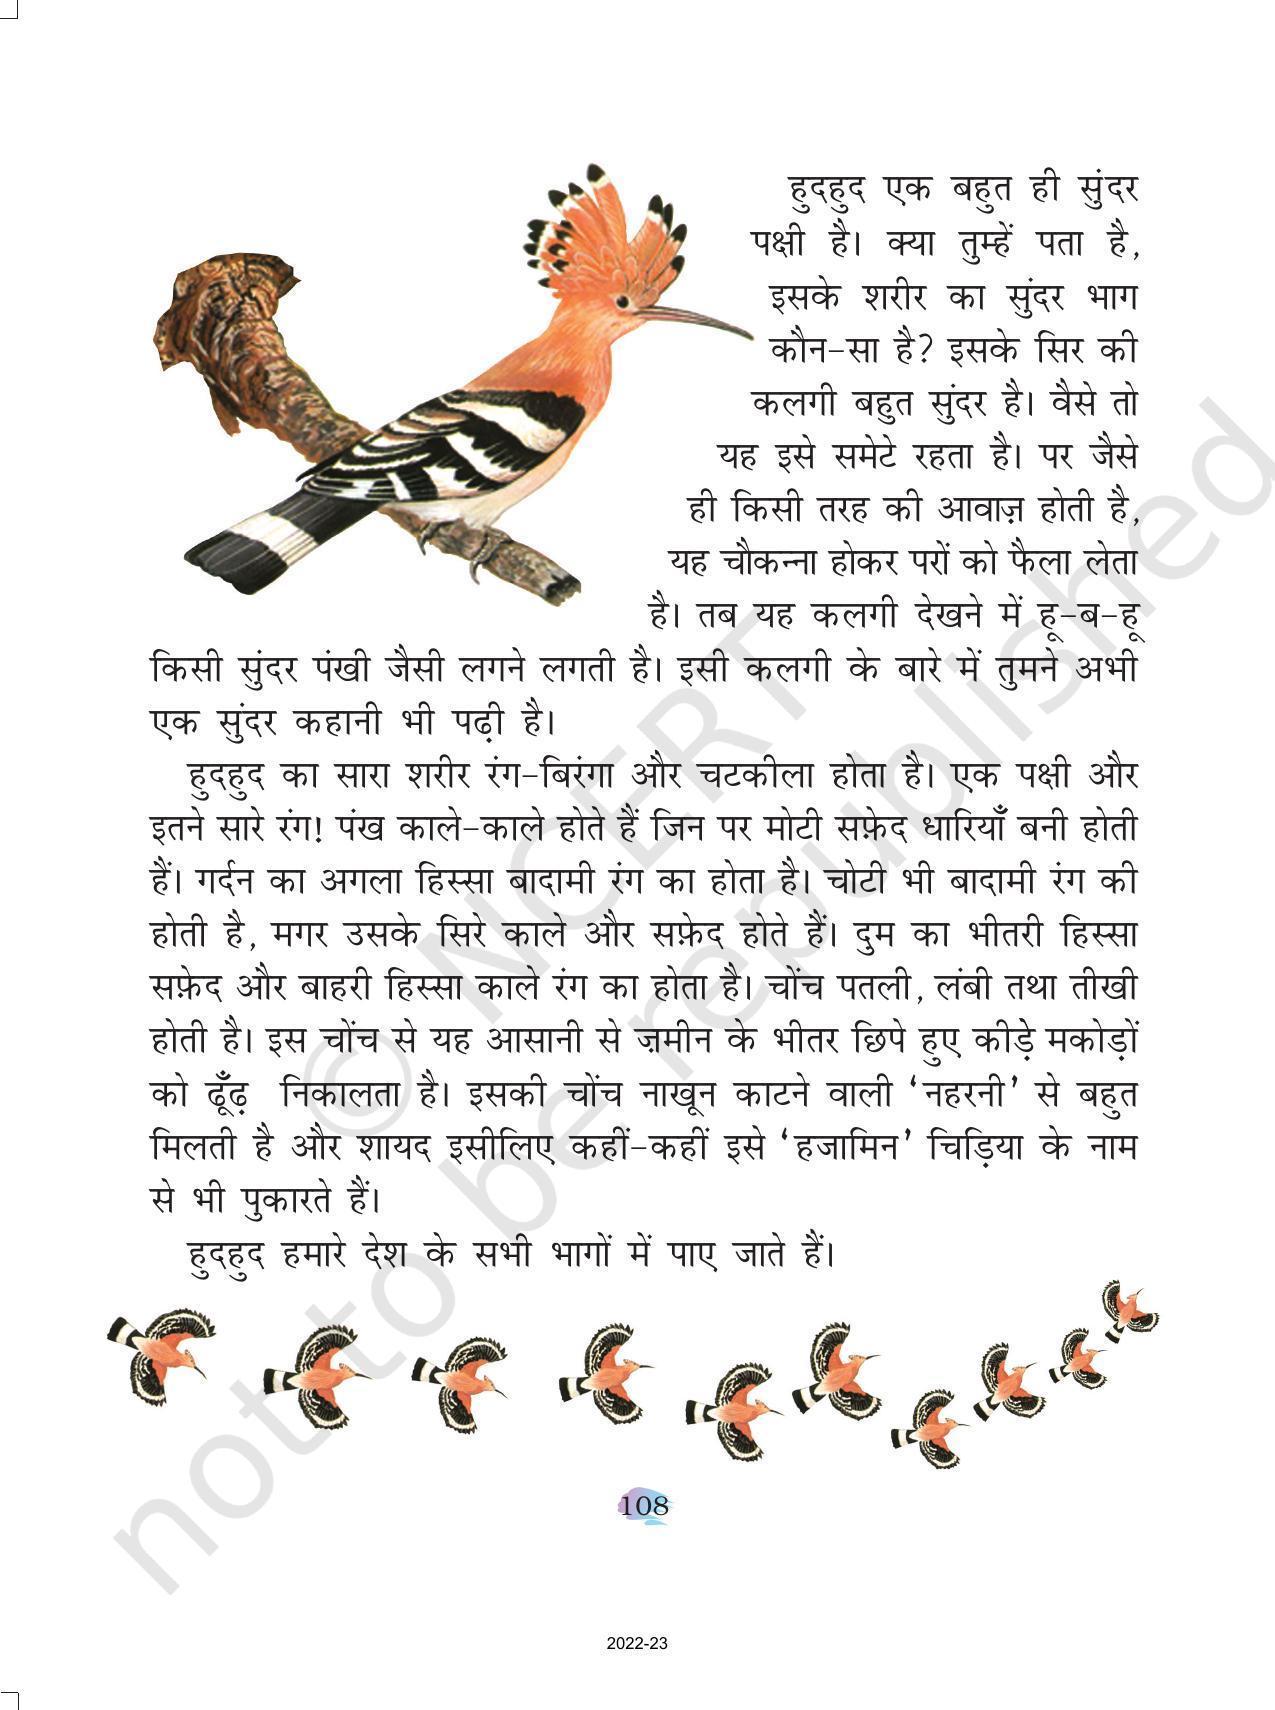 NCERT Book for Class 4 Hindi Chapter 13 हुदहुद - Page 3